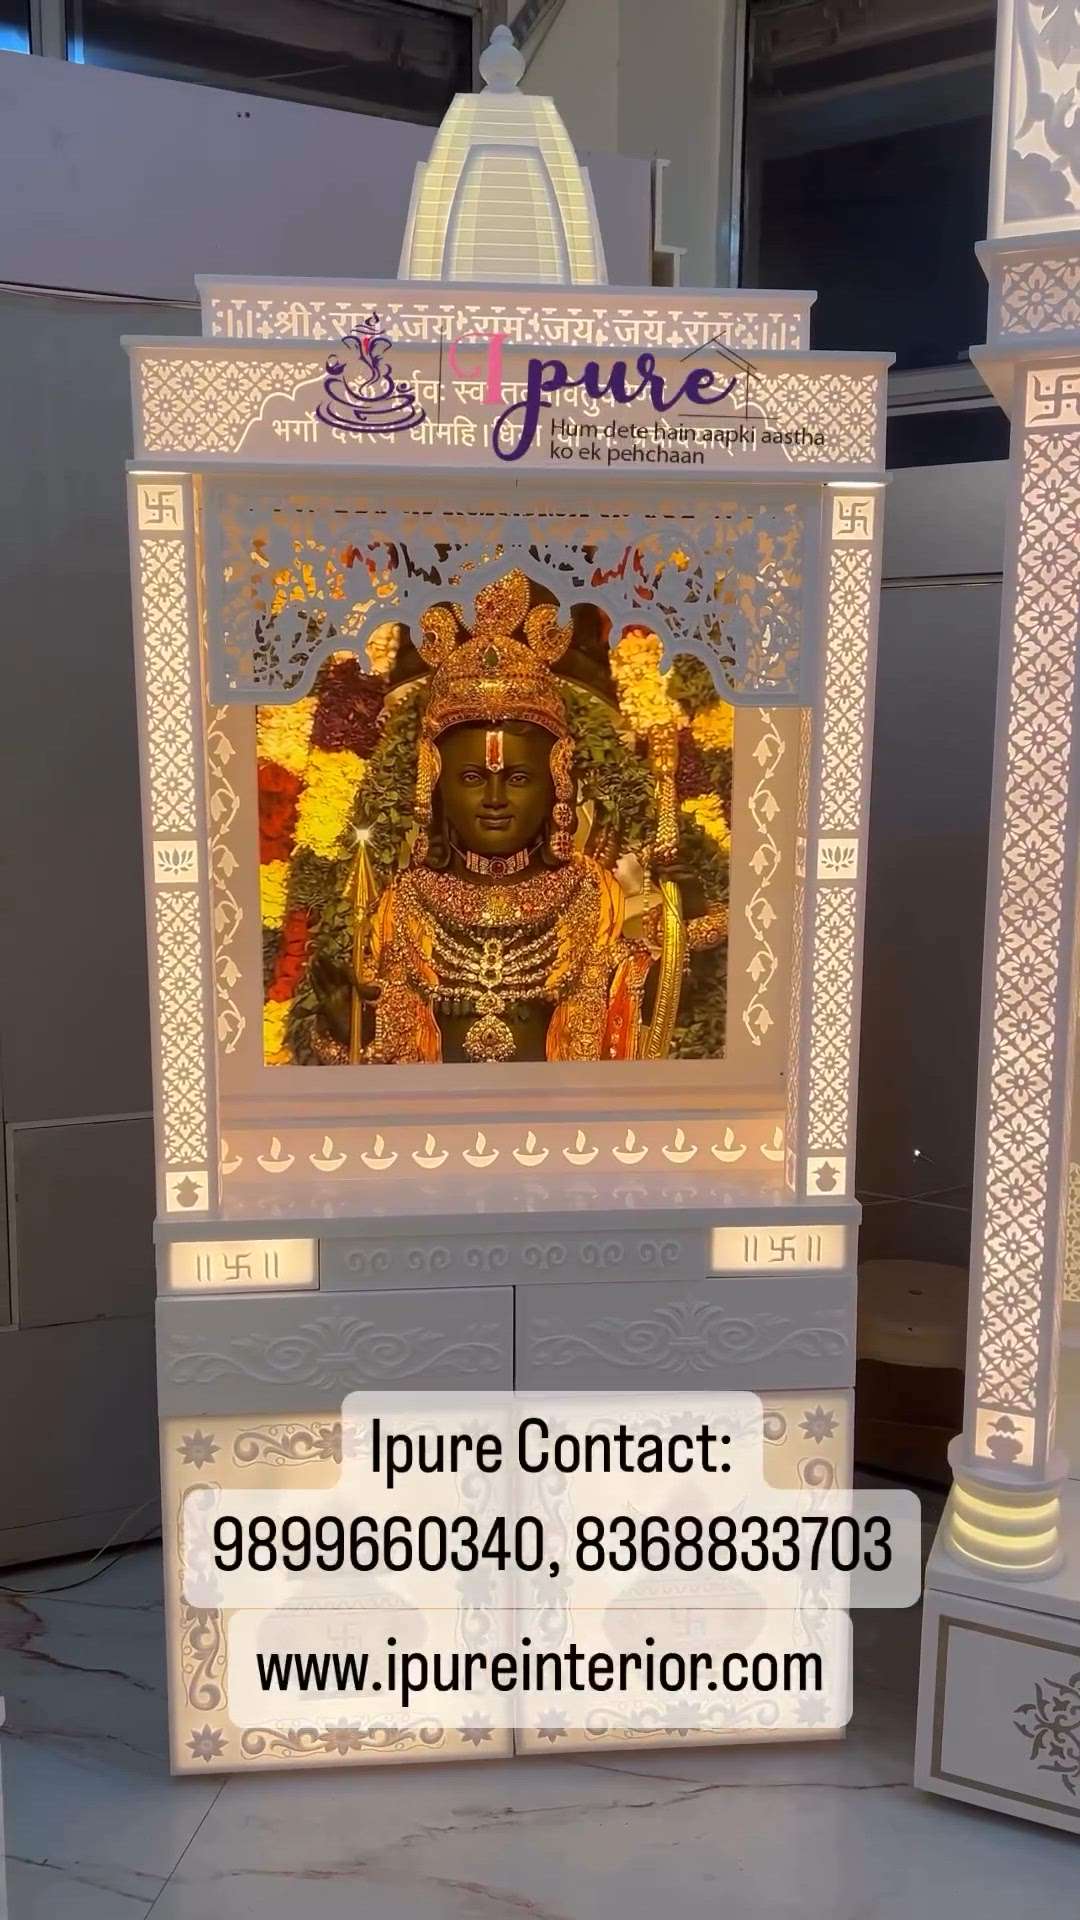 Corian Mandir / Corian Temple / Pooja Mandir / Pooja Temple - by Ipure

contact- 9899660340 or 8368833703

We are the leading Manufacturer of Corian Mandir / Corian Temple or any type of Interior or Exterioe work.

For Price & other details please Contact Mr. Rajesh Biswas on CALL/WHATSAPP : 8368833703 or 9899660340.

We deliver All Over India & All Over World.

Please check website for address .

Thanks,
Ipure Team
www.ipureinterior.com
https://youtube.com/@ipureinterior6319?si=SinsRixOeJGpjrEX
 
#corian #corianmandir #coriantemple #coriandesign #mandir #mandirdesign #InteriorDesigner #manufacturer #luxurydecor #Architect #architectdesign #Architectural&Interior #LUXURY_INTERIOR #Poojaroom #poojaroomdesign #poojaunit #poojaroomdecor #poojamandir #poojaroominterior #poojaroomconcepts #pooja